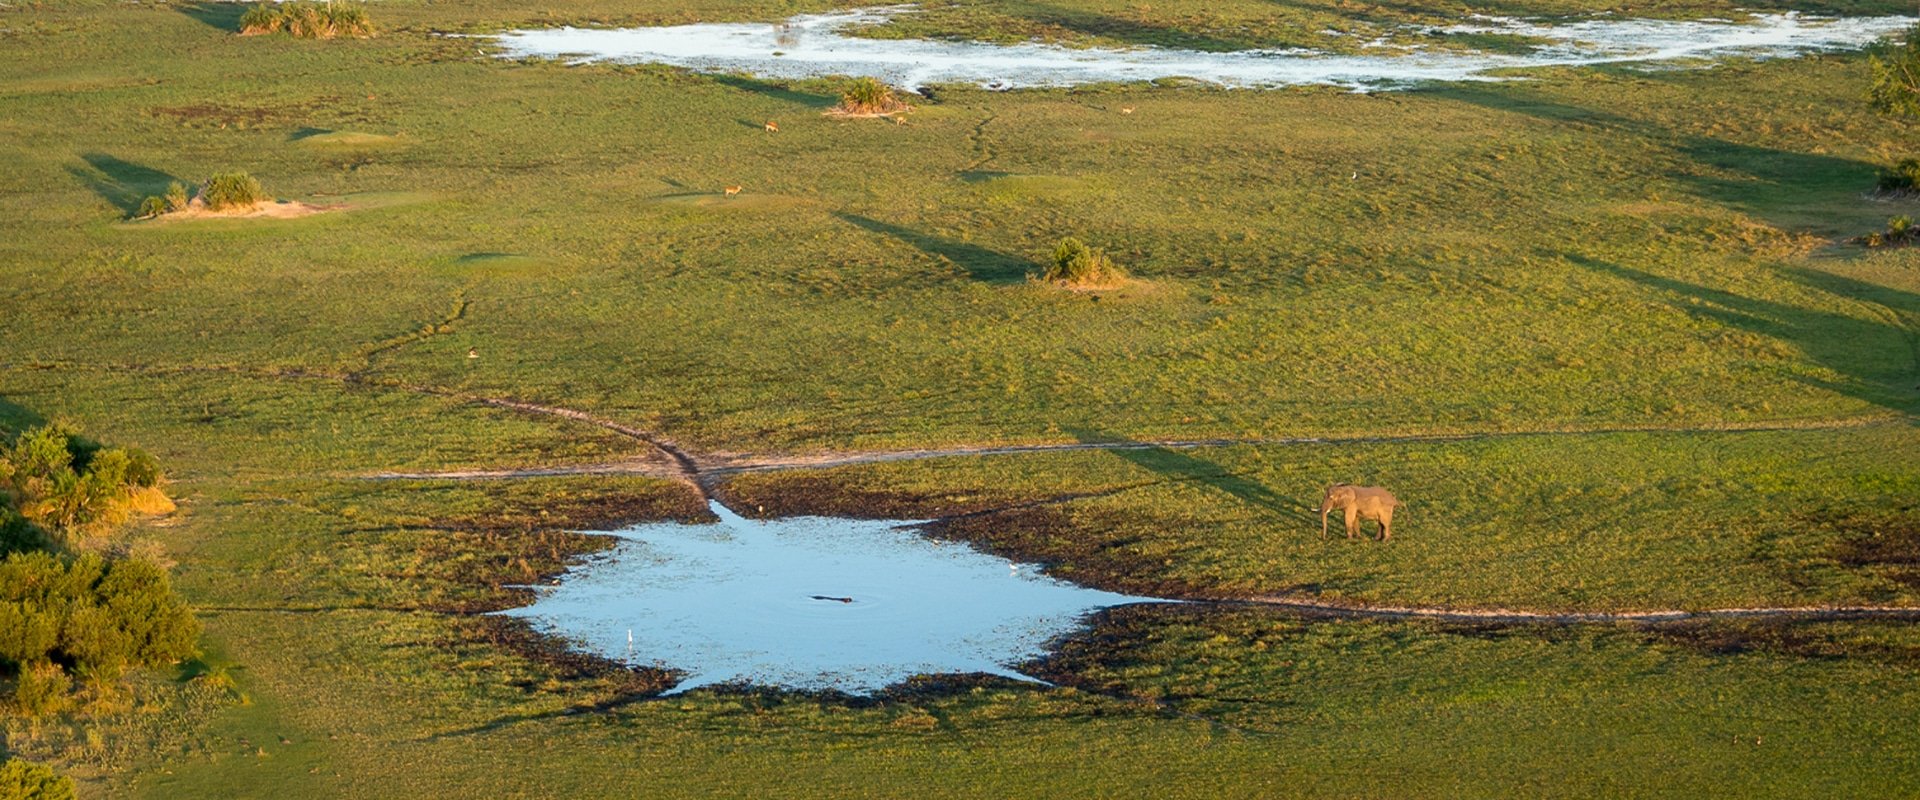 Marvel at the Okavango from above on a helicopter trip